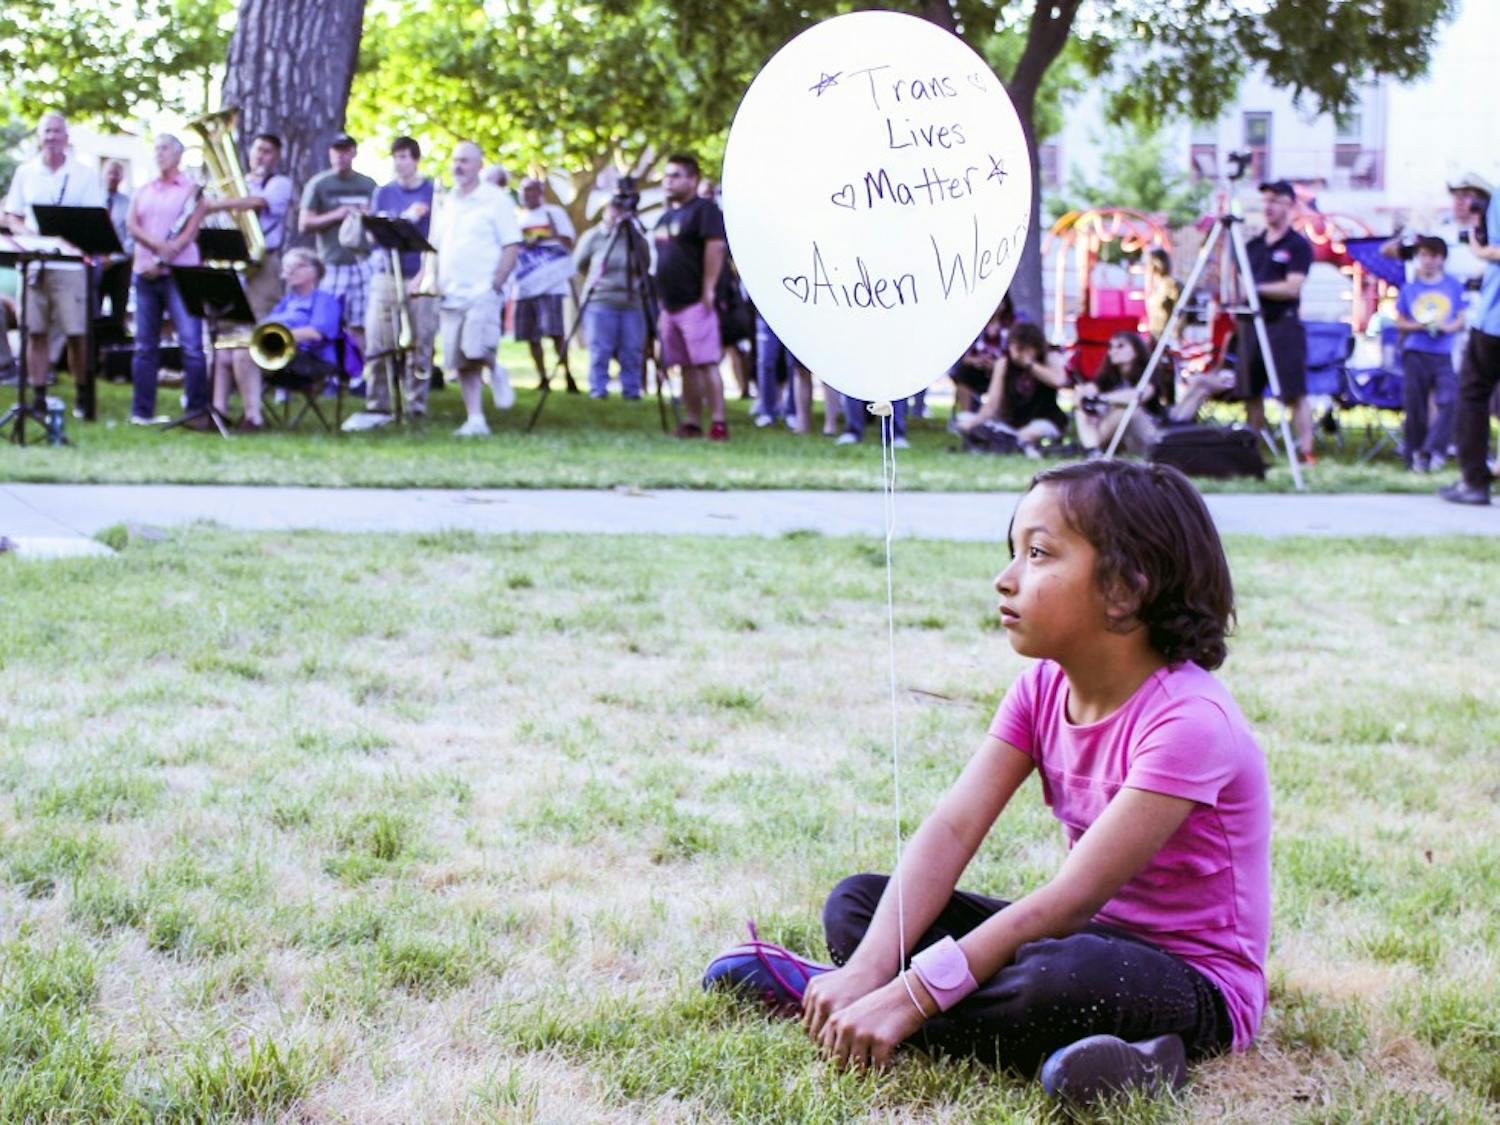 Aiden Wear, 8 years old, holds a balloon in support of the Trans Lives Matter Movement and as a tribute to the 49 lives lost last year in the Orlando night club shooting. The Candlelight Vigil was held at Morningside Park on June 8, 2017.